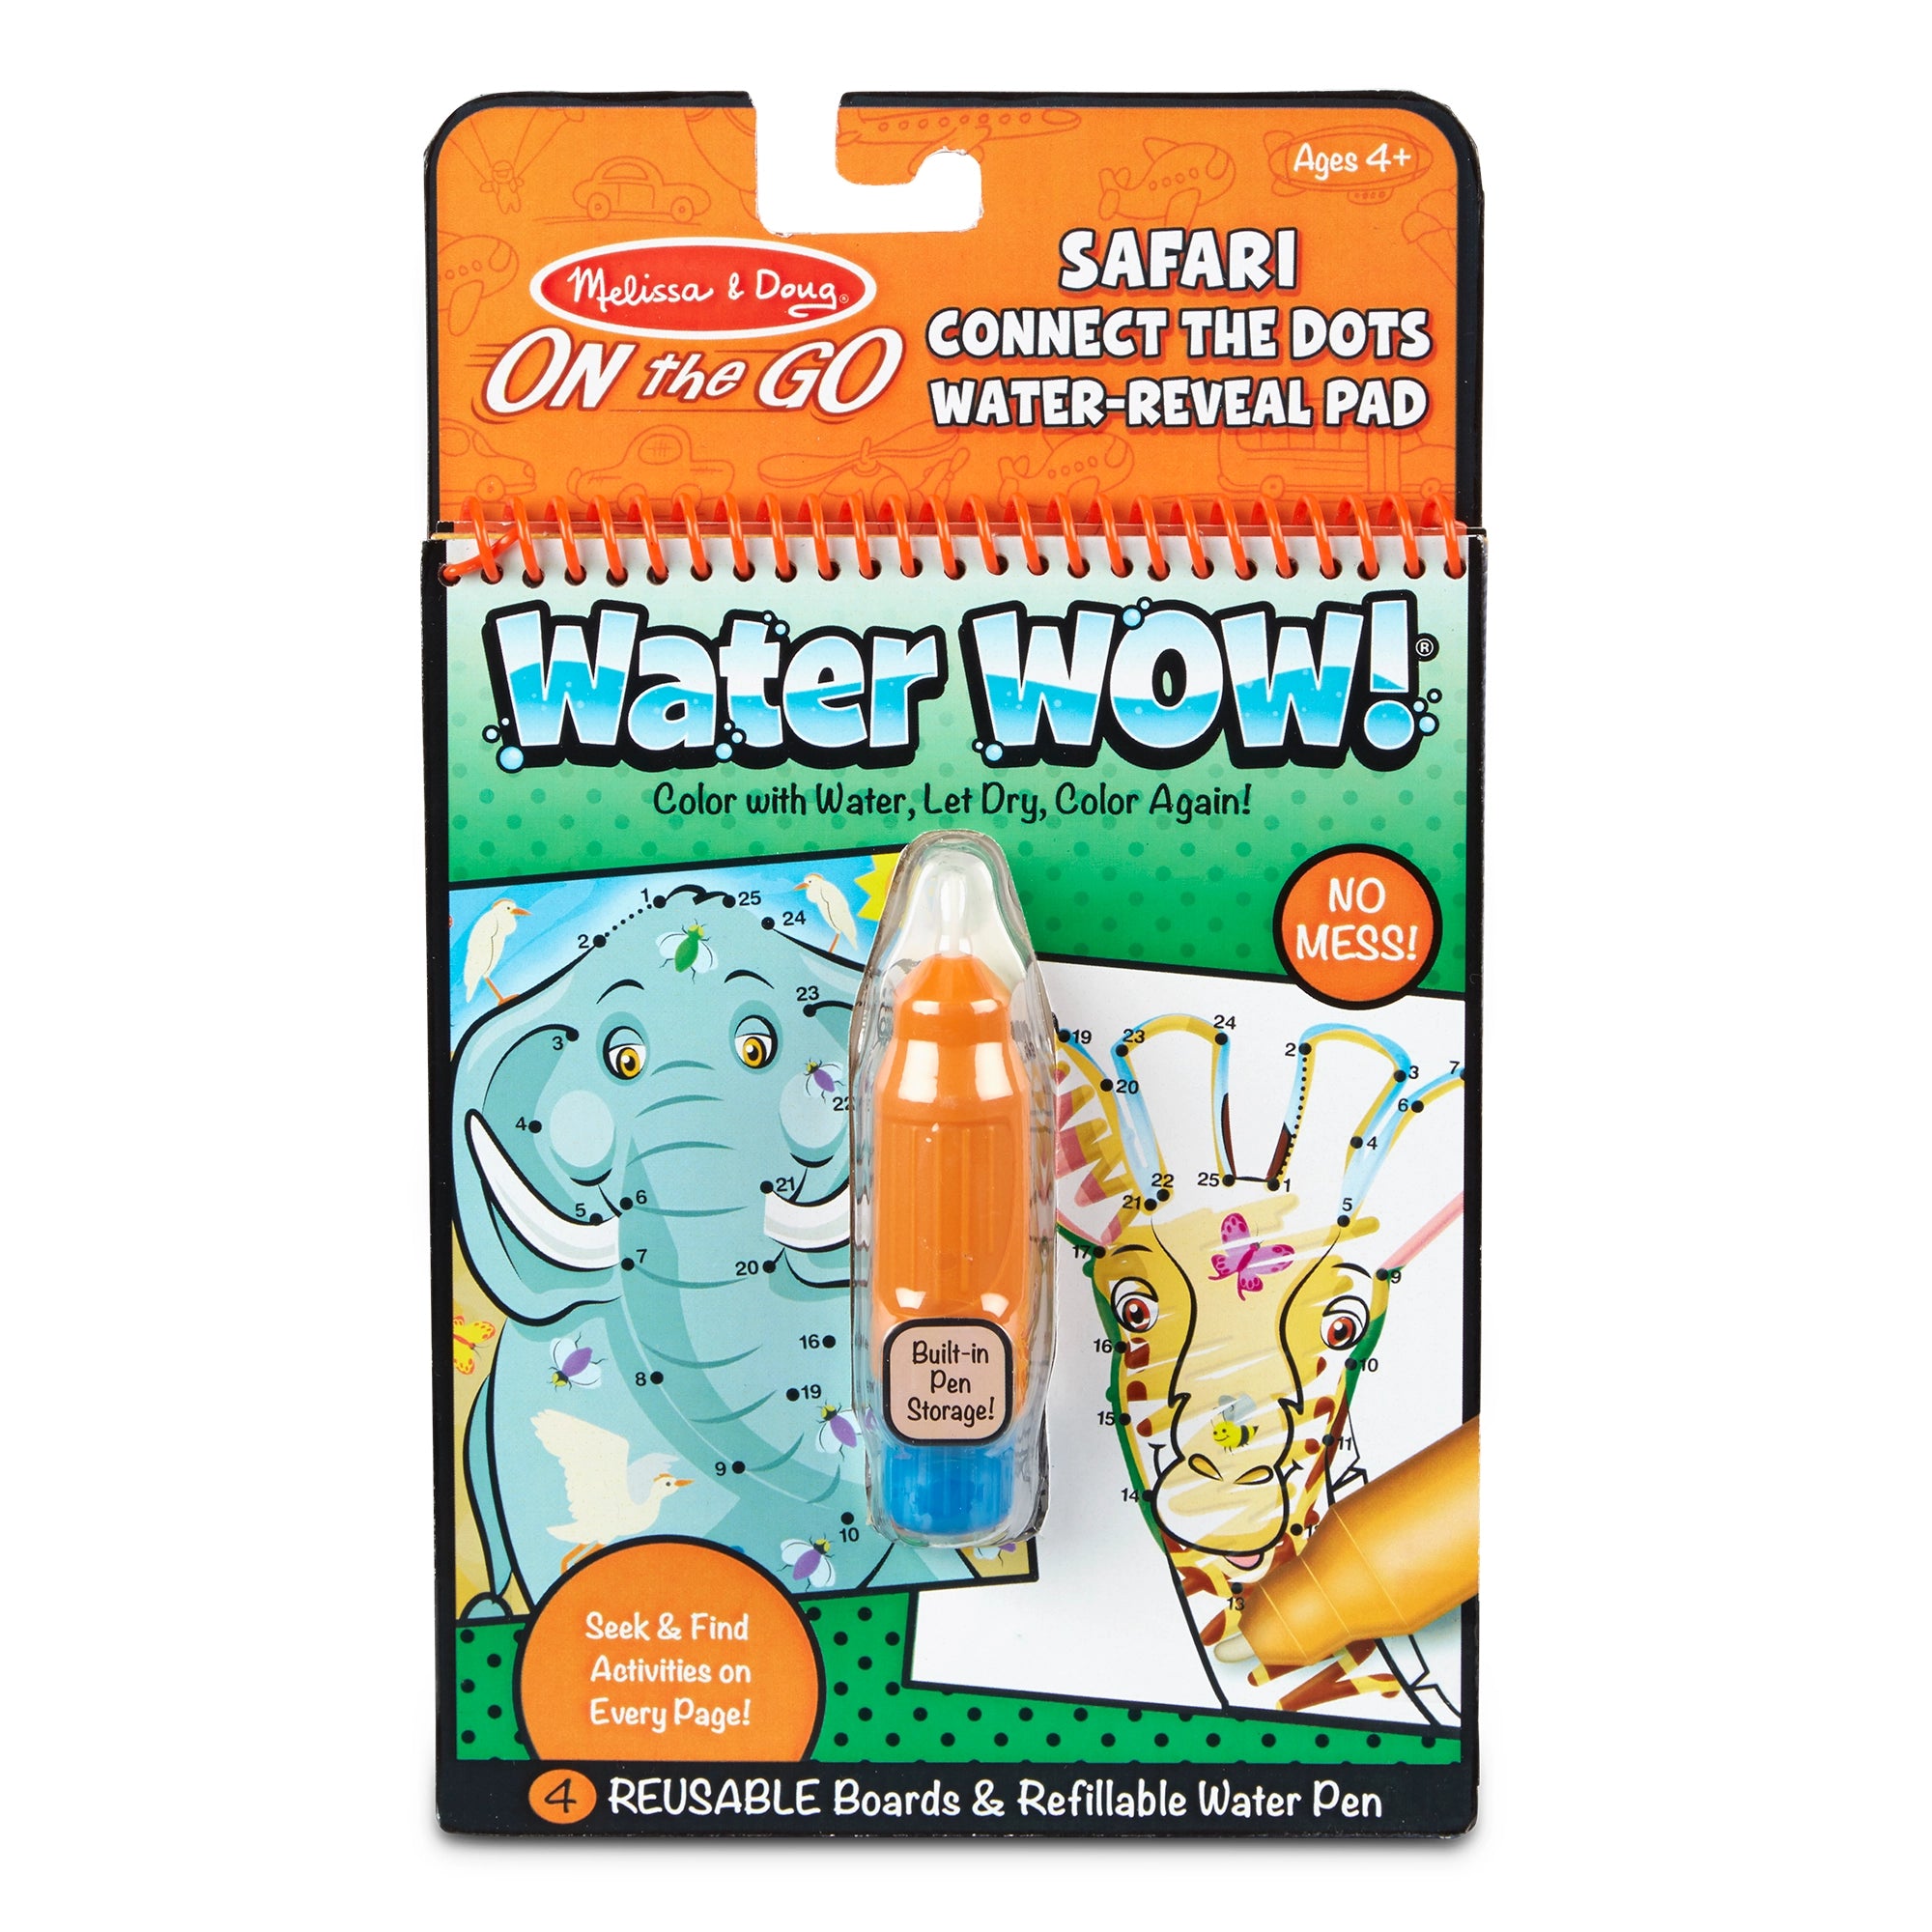 Reusable Water Wow! Connect the Dots Safari - On the Go Travel Activity